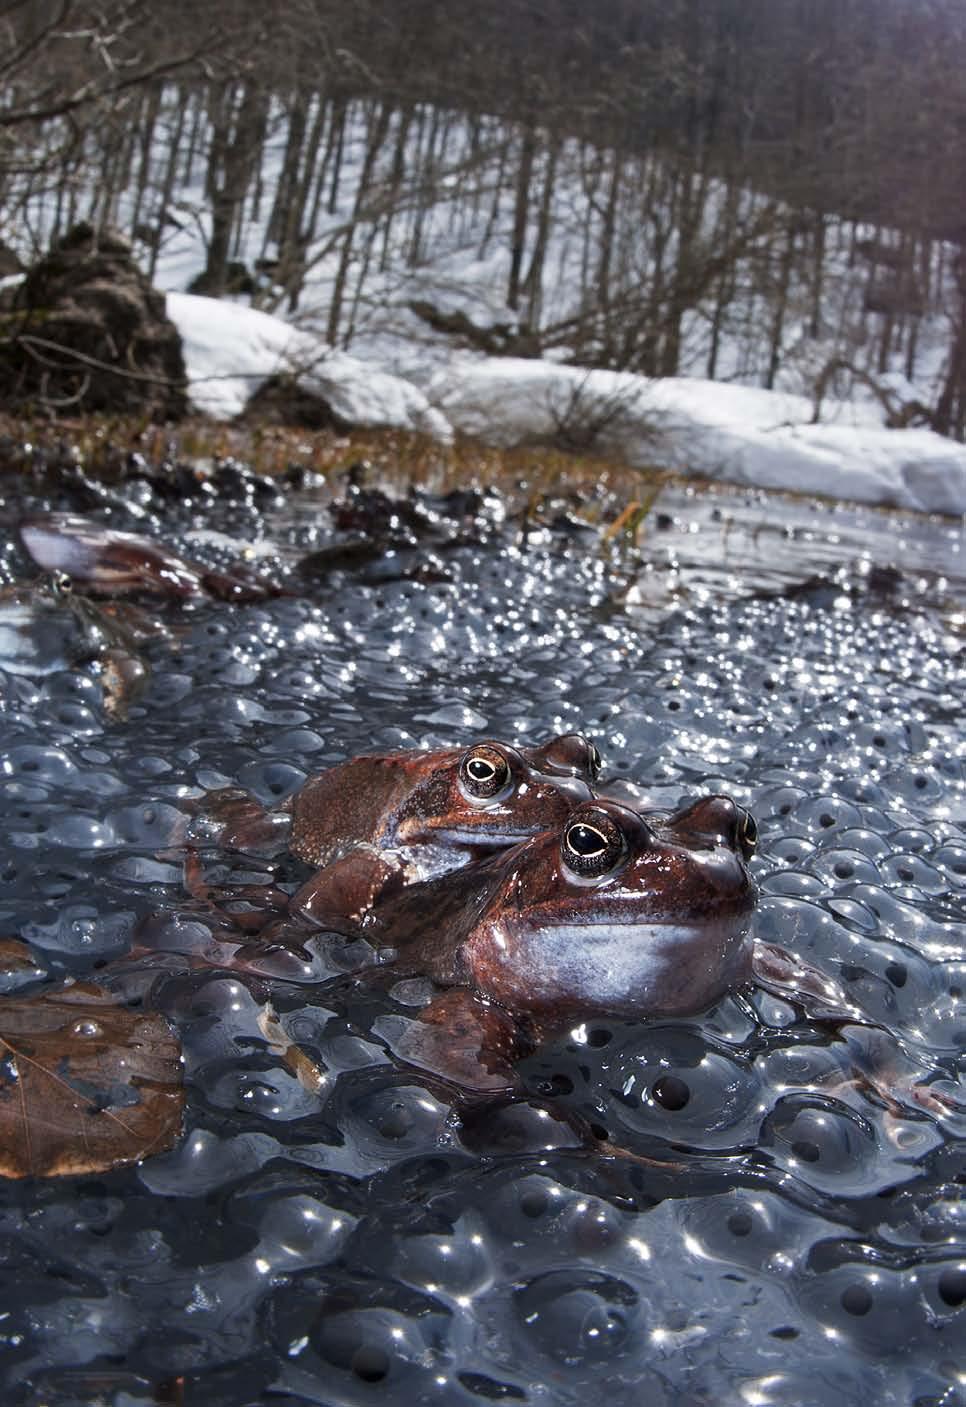 71 Scores of mating frogs, locked in embrace, now dot the half-frozen surface of